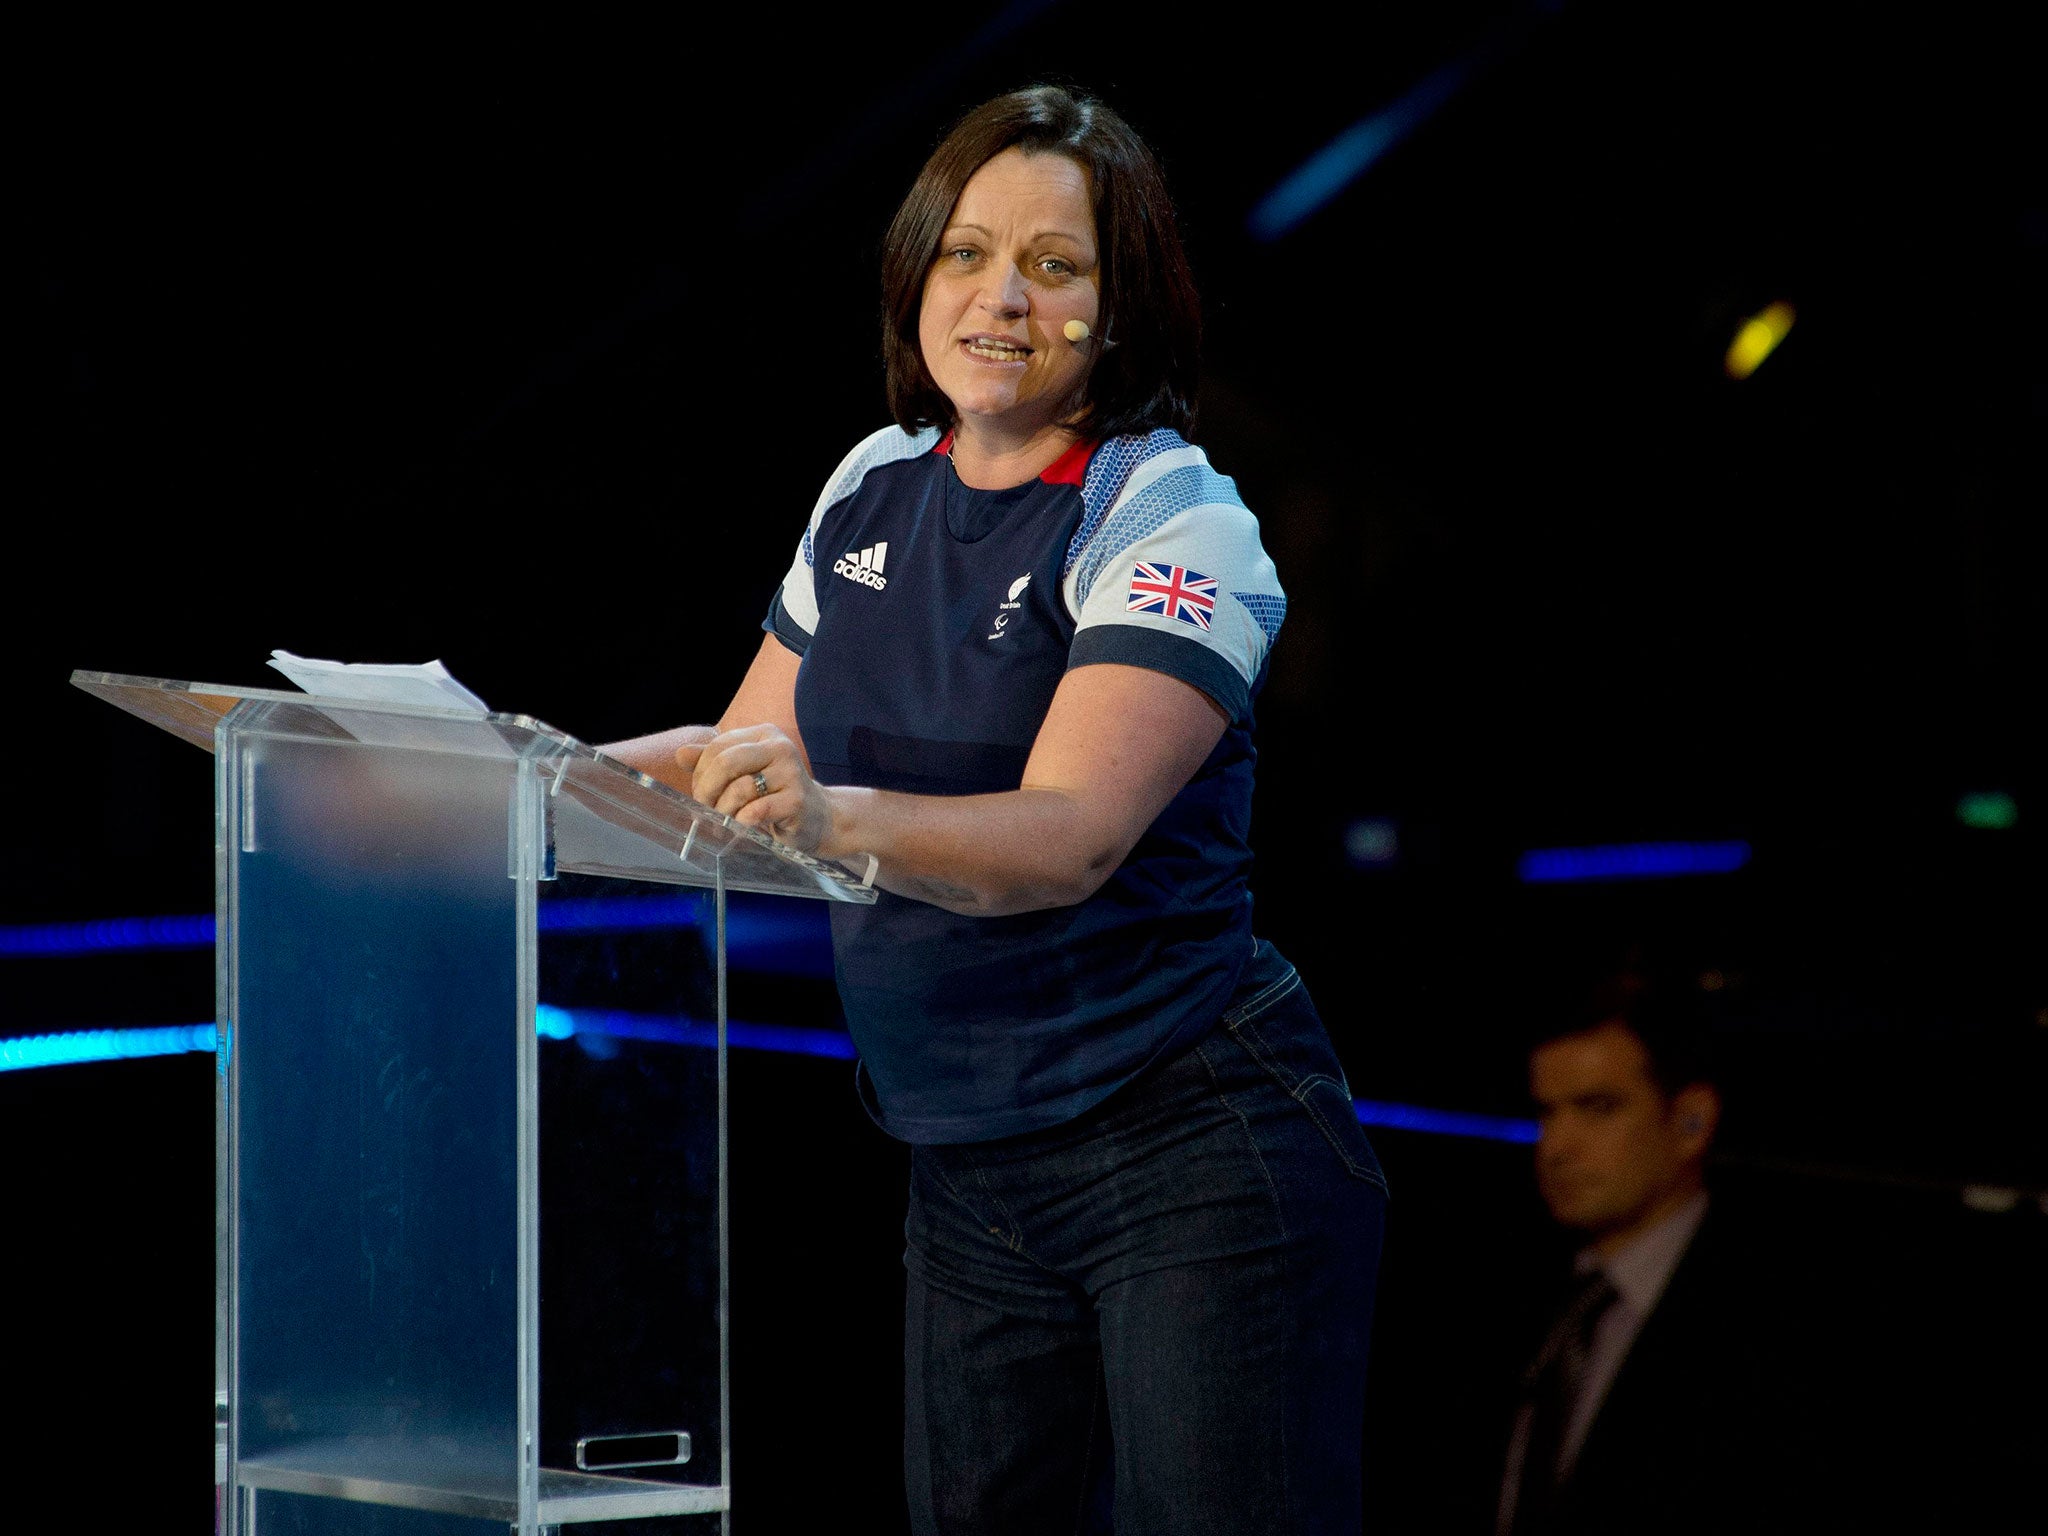 Martine Wiltshire, sitting Volleyball Player and Paralympian Team GB